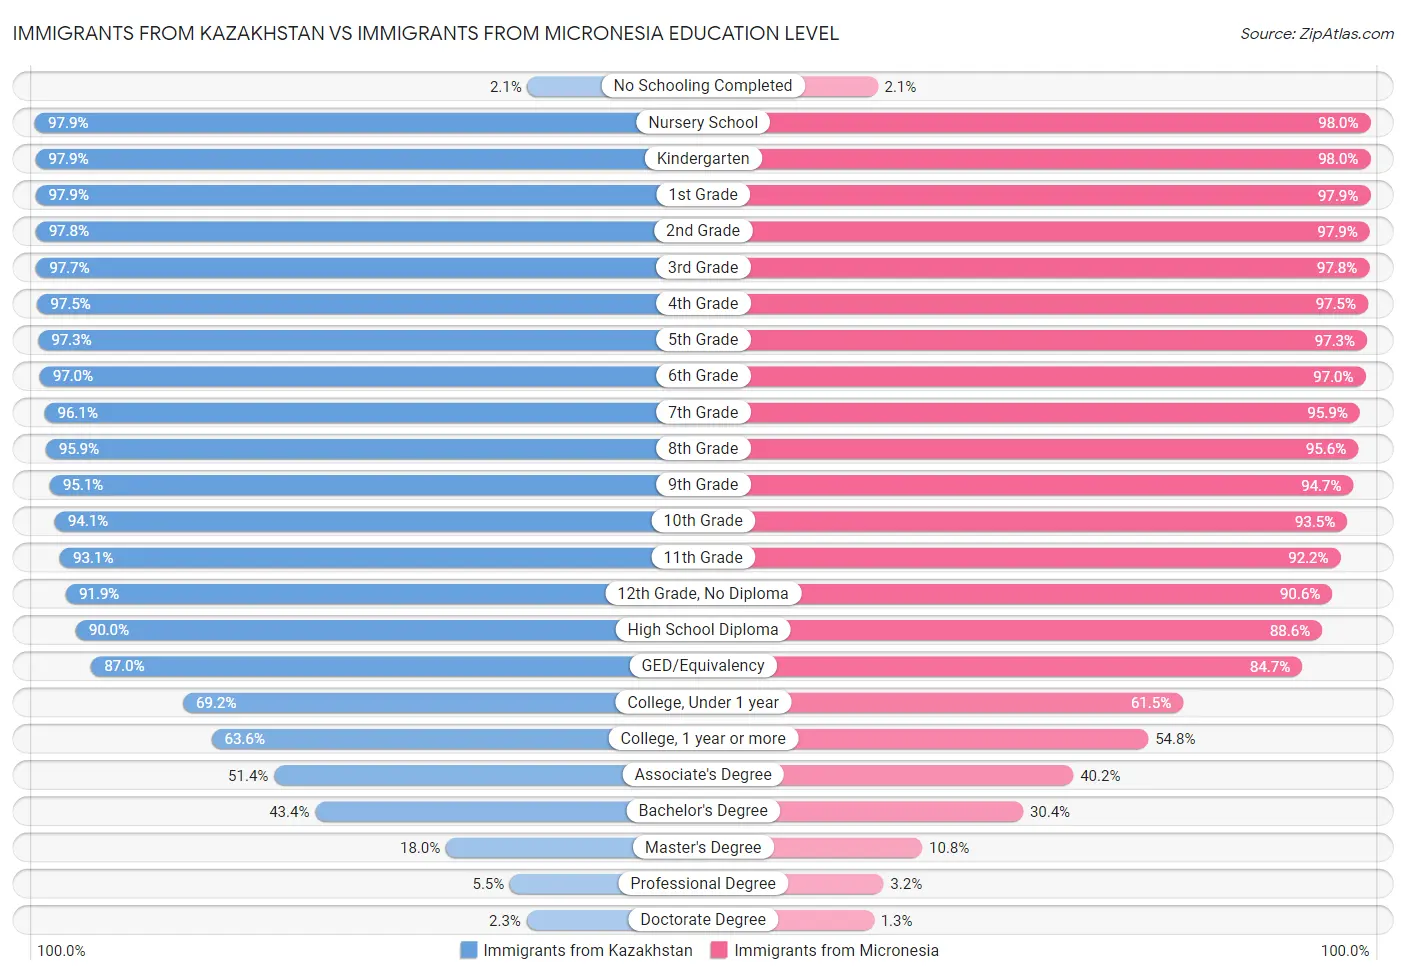 Immigrants from Kazakhstan vs Immigrants from Micronesia Education Level